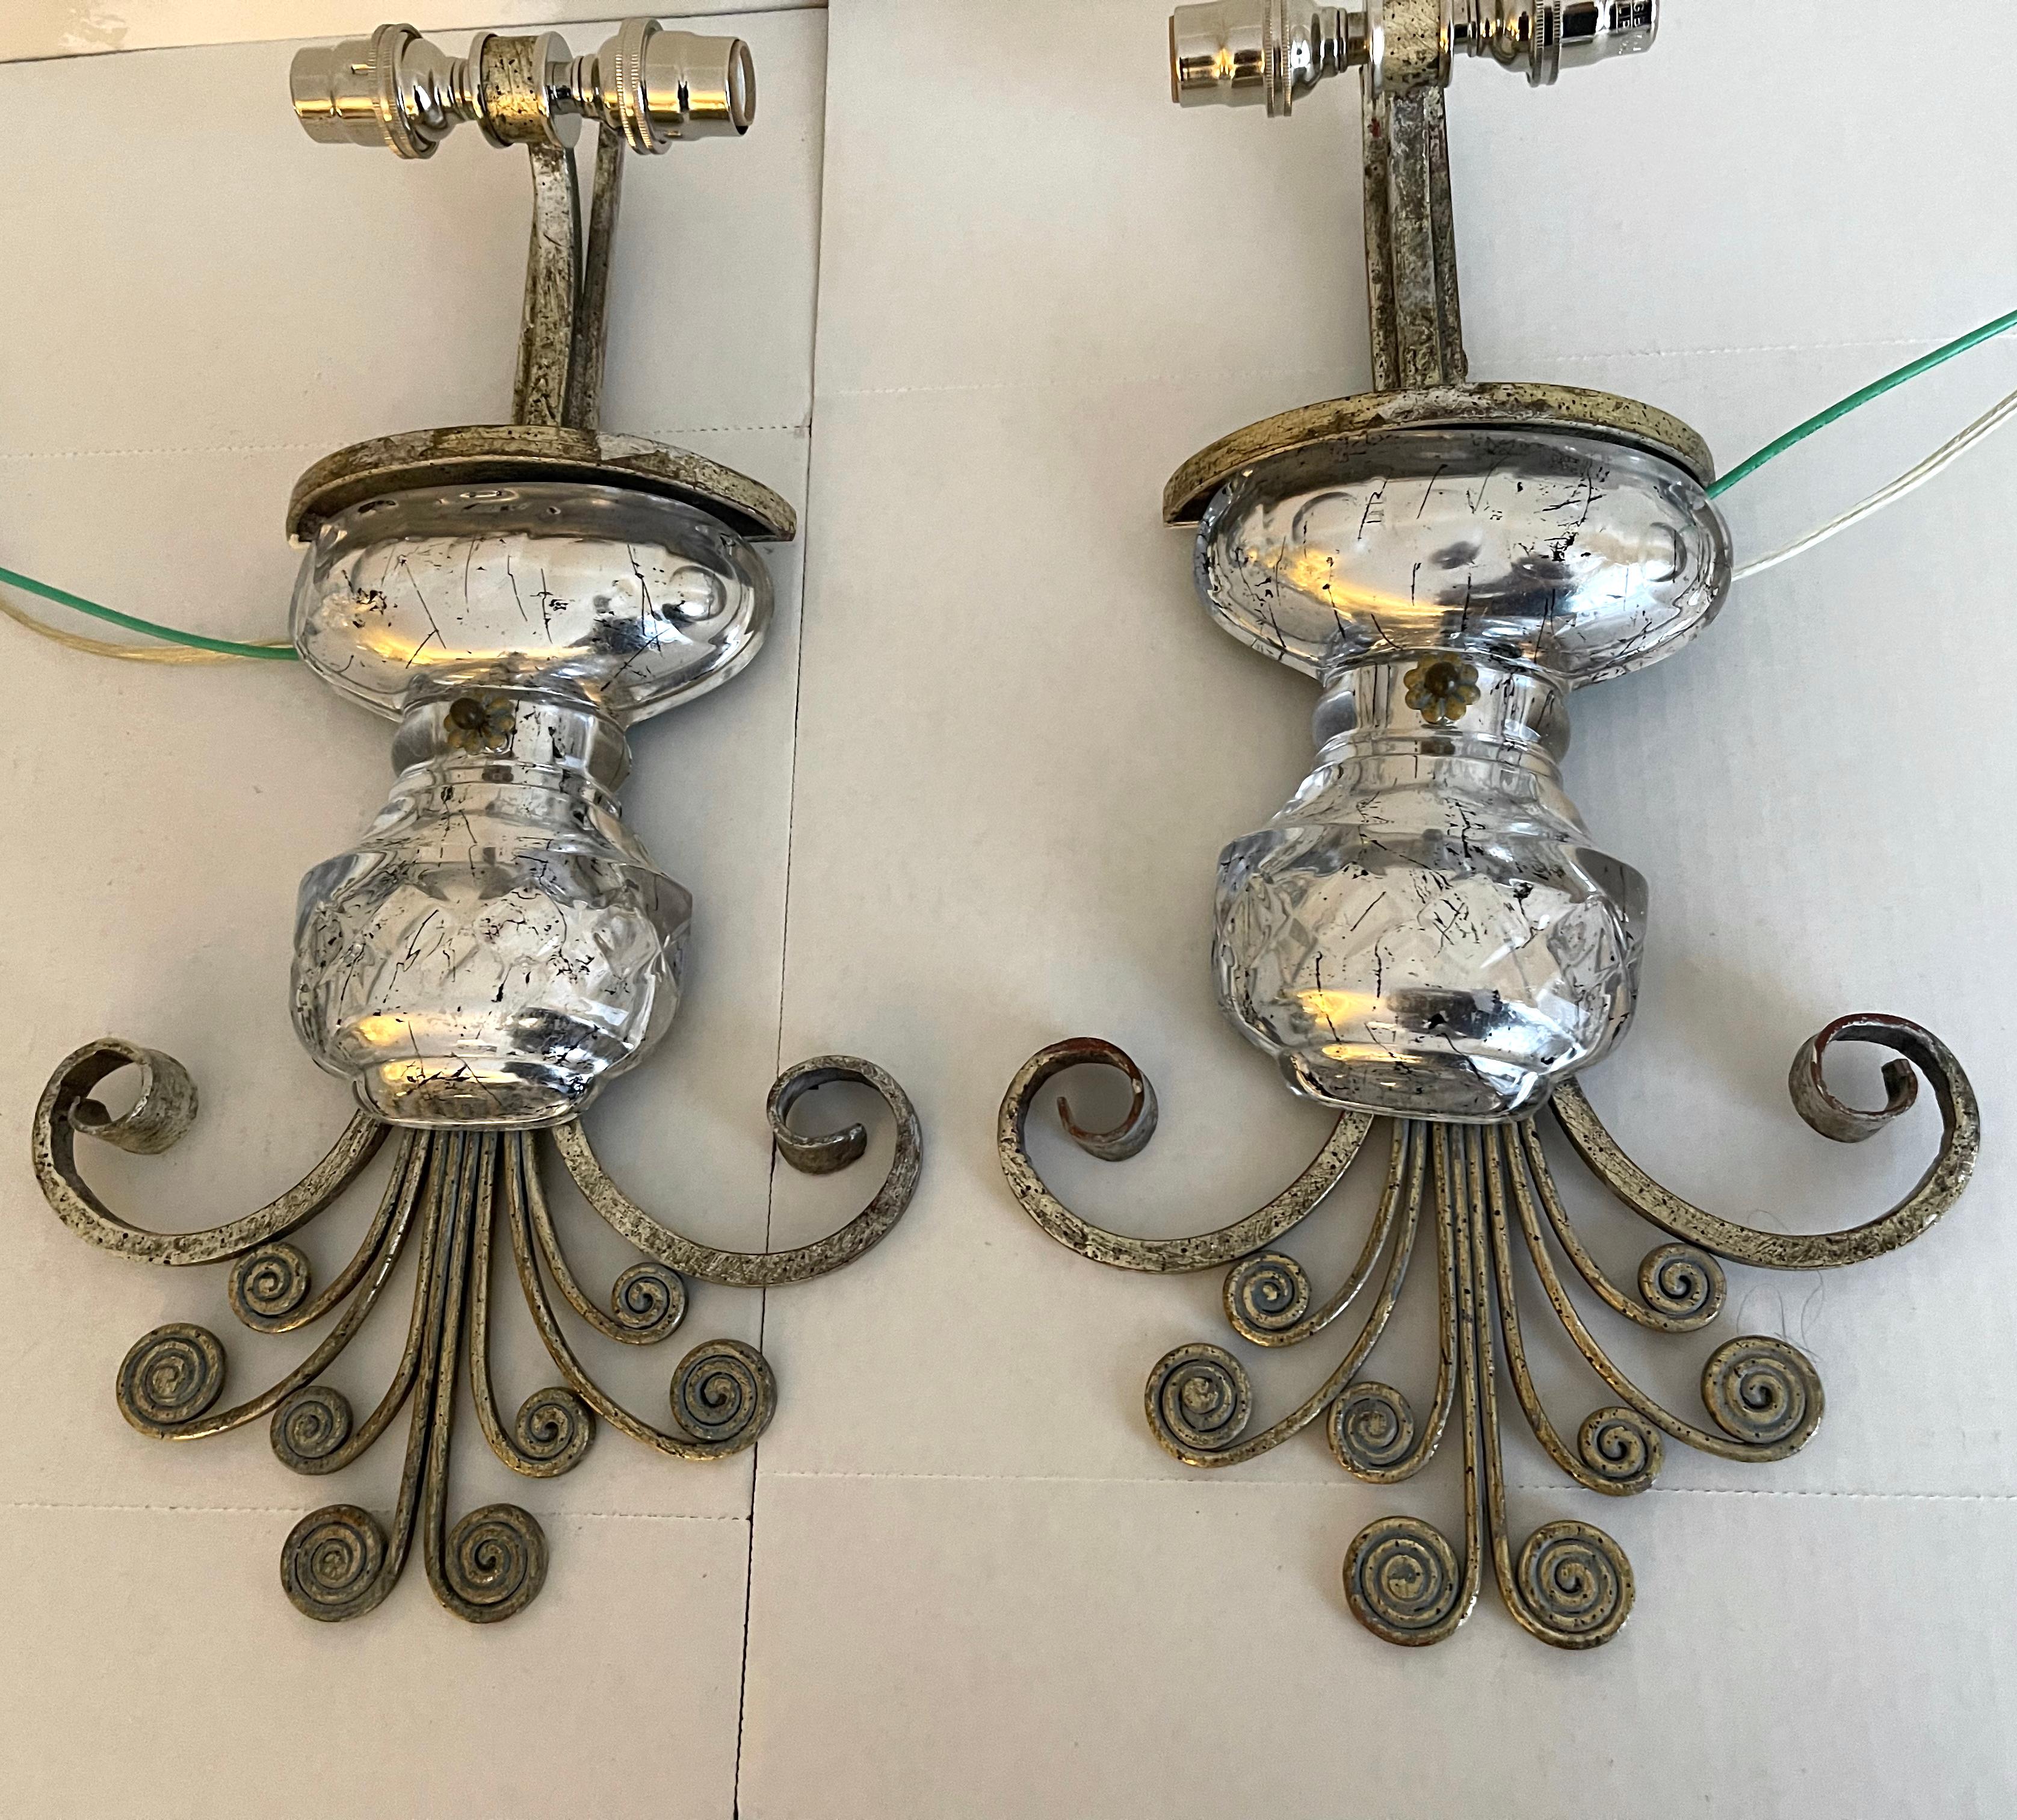 Pair of 1980s French mercury glass sconces attributed to Maison Bagués. Silver gilt iron painted finish. 
Newly rewired. Each light takes two chandelier bulbs (not included).

Please note that additional components such as back plates may be